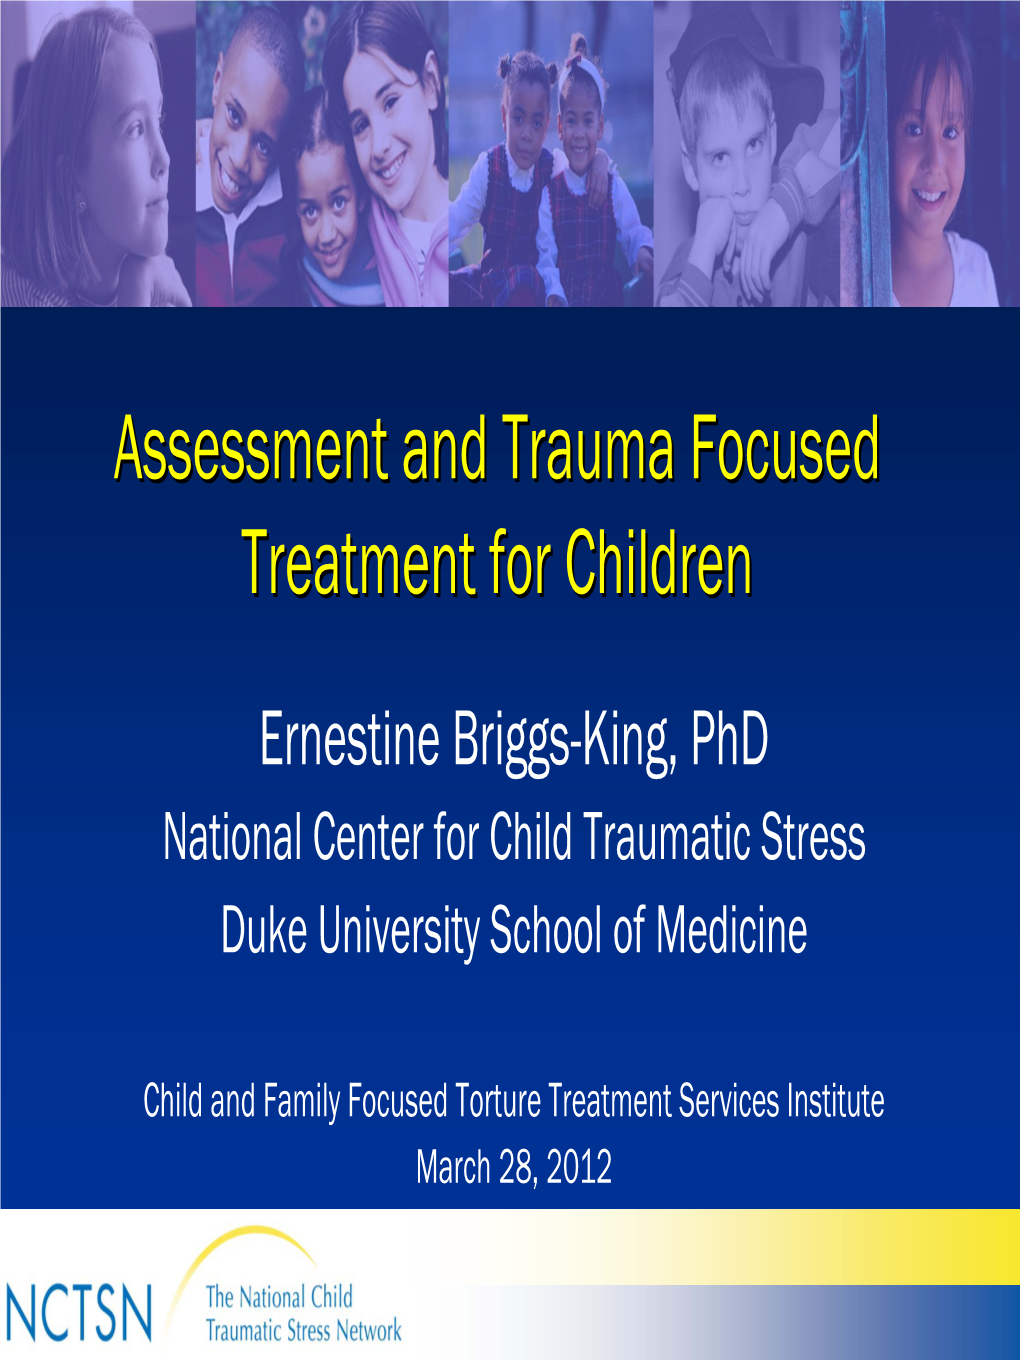 Spreading Evidence Based Practices for Treatment of Abused Children